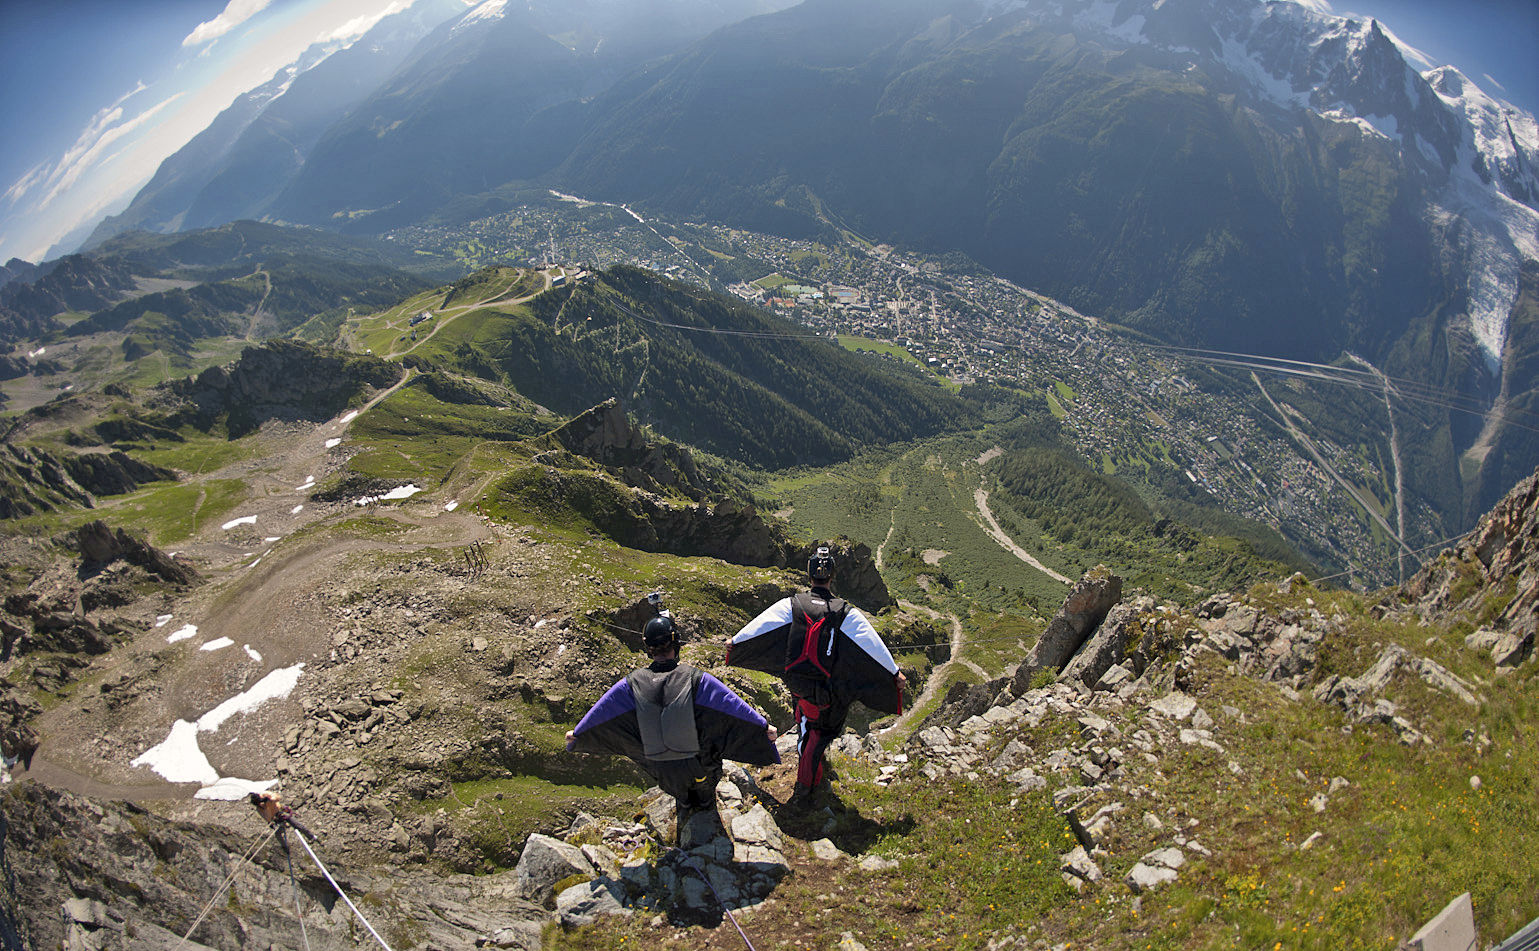 In this photo dated July 21, 2012, two base jumpers wearing wingsuits prepare to jump from the Brevent needle above Chamonix in the French Alps. For nearly two months, daredevils in skin-tight suits with batwing sleeves and a flap between their legs hurled themselves off the Brevent cliff, soaring through the Alpine skies. Last week, tragedy struck: A Norwegian wingsuit flyer was killed when his parachute failed to open. The next day, the mayor of Chamonix-Mont Blanc banned wingsuits. The decision has triggered a debate about how to weigh the dangers of extreme sport against the passion of the thrill-seekers the Alpine town has famously encouraged. (AP Photo/Cyril Duval)